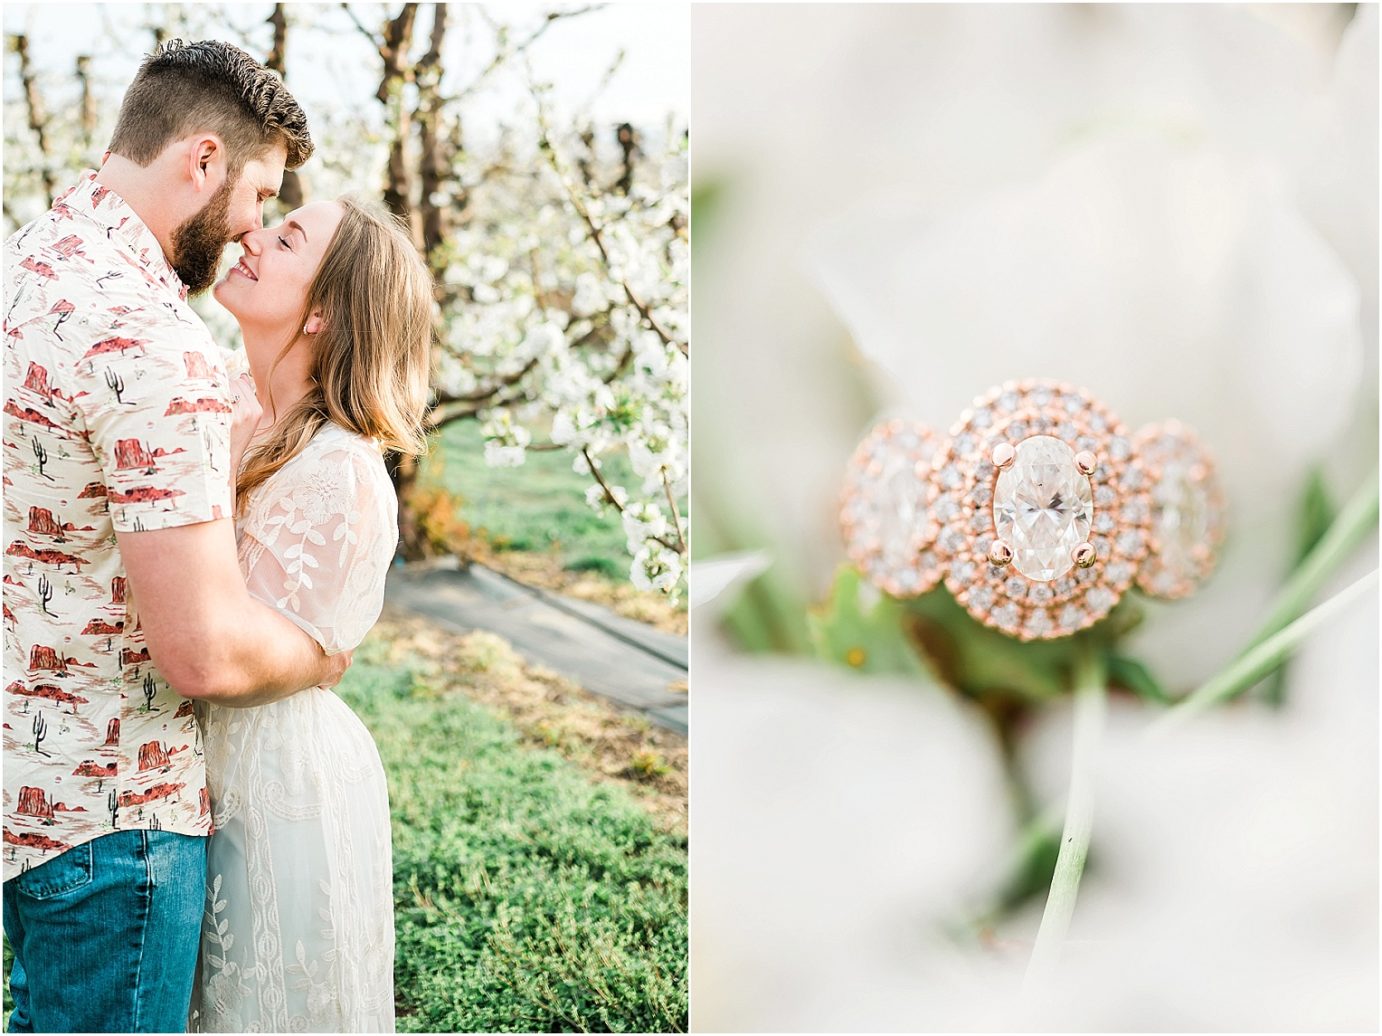 eastern washington engagement session PNW photographer Travis and arianna kissing around cherry blossoms